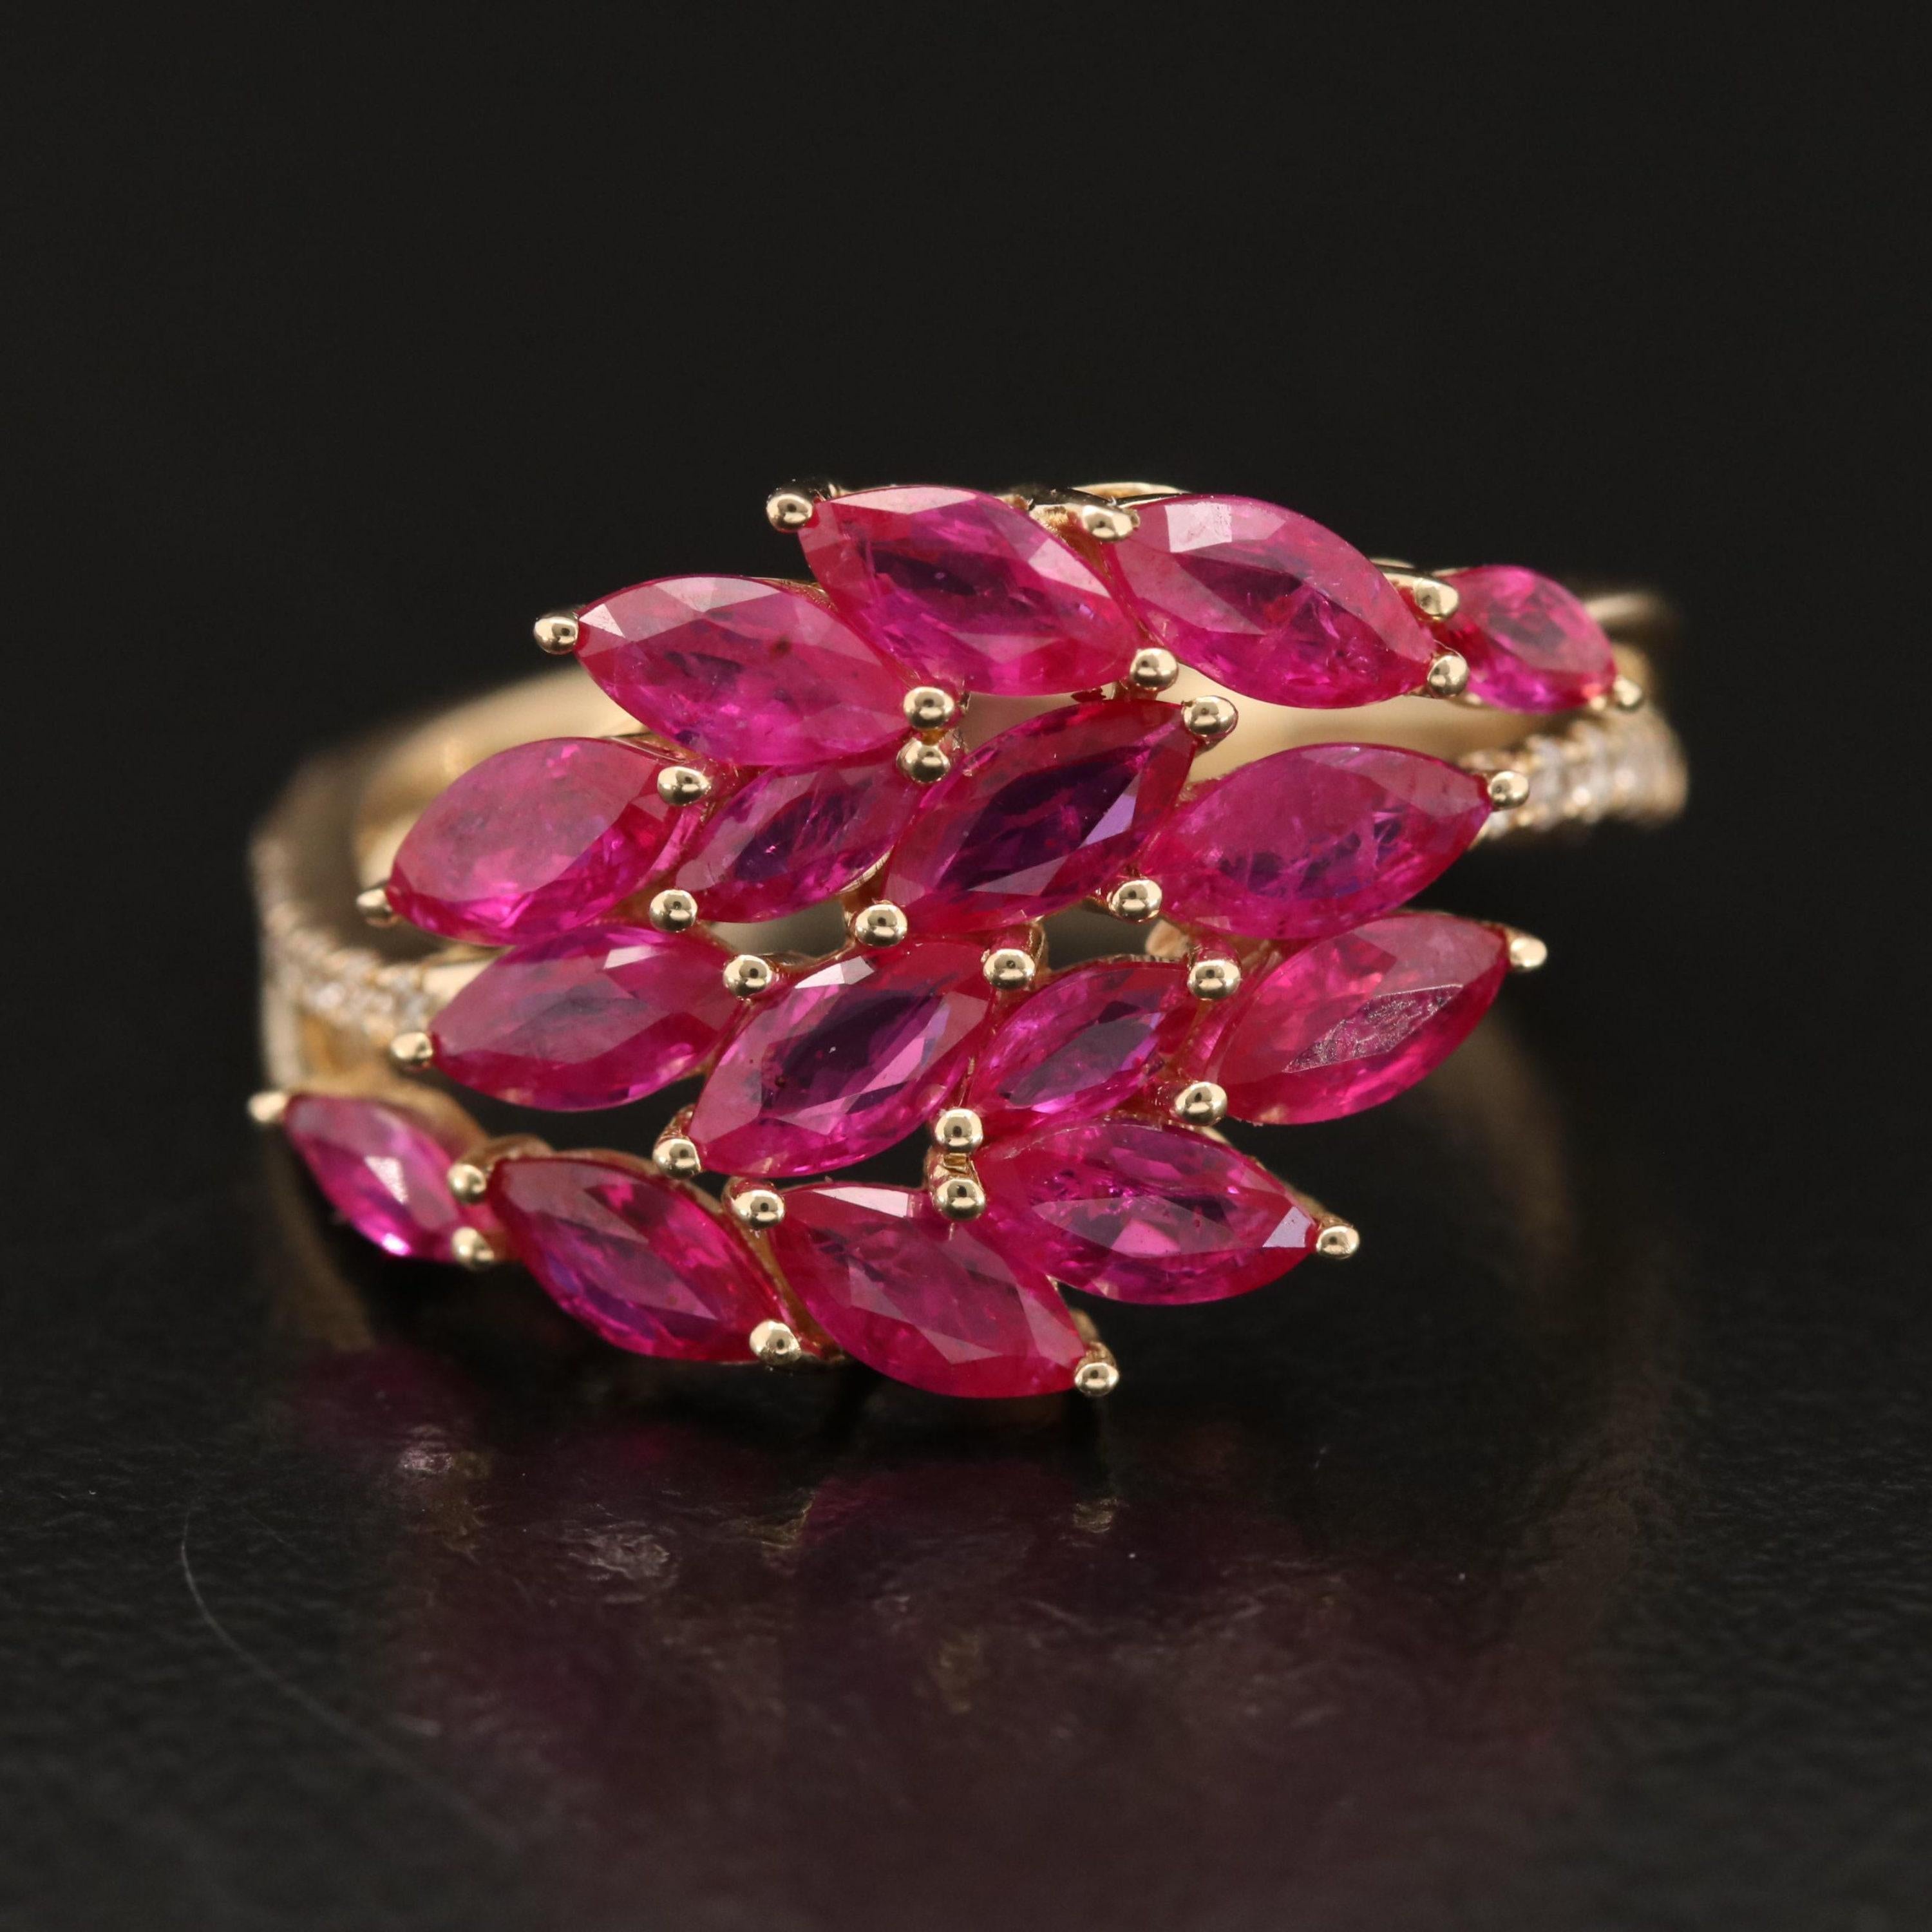 For Sale:  Antique Art Deco Style Marquise Cut 1.42 Carat Natural Ruby Diamond Fashion Ring 6